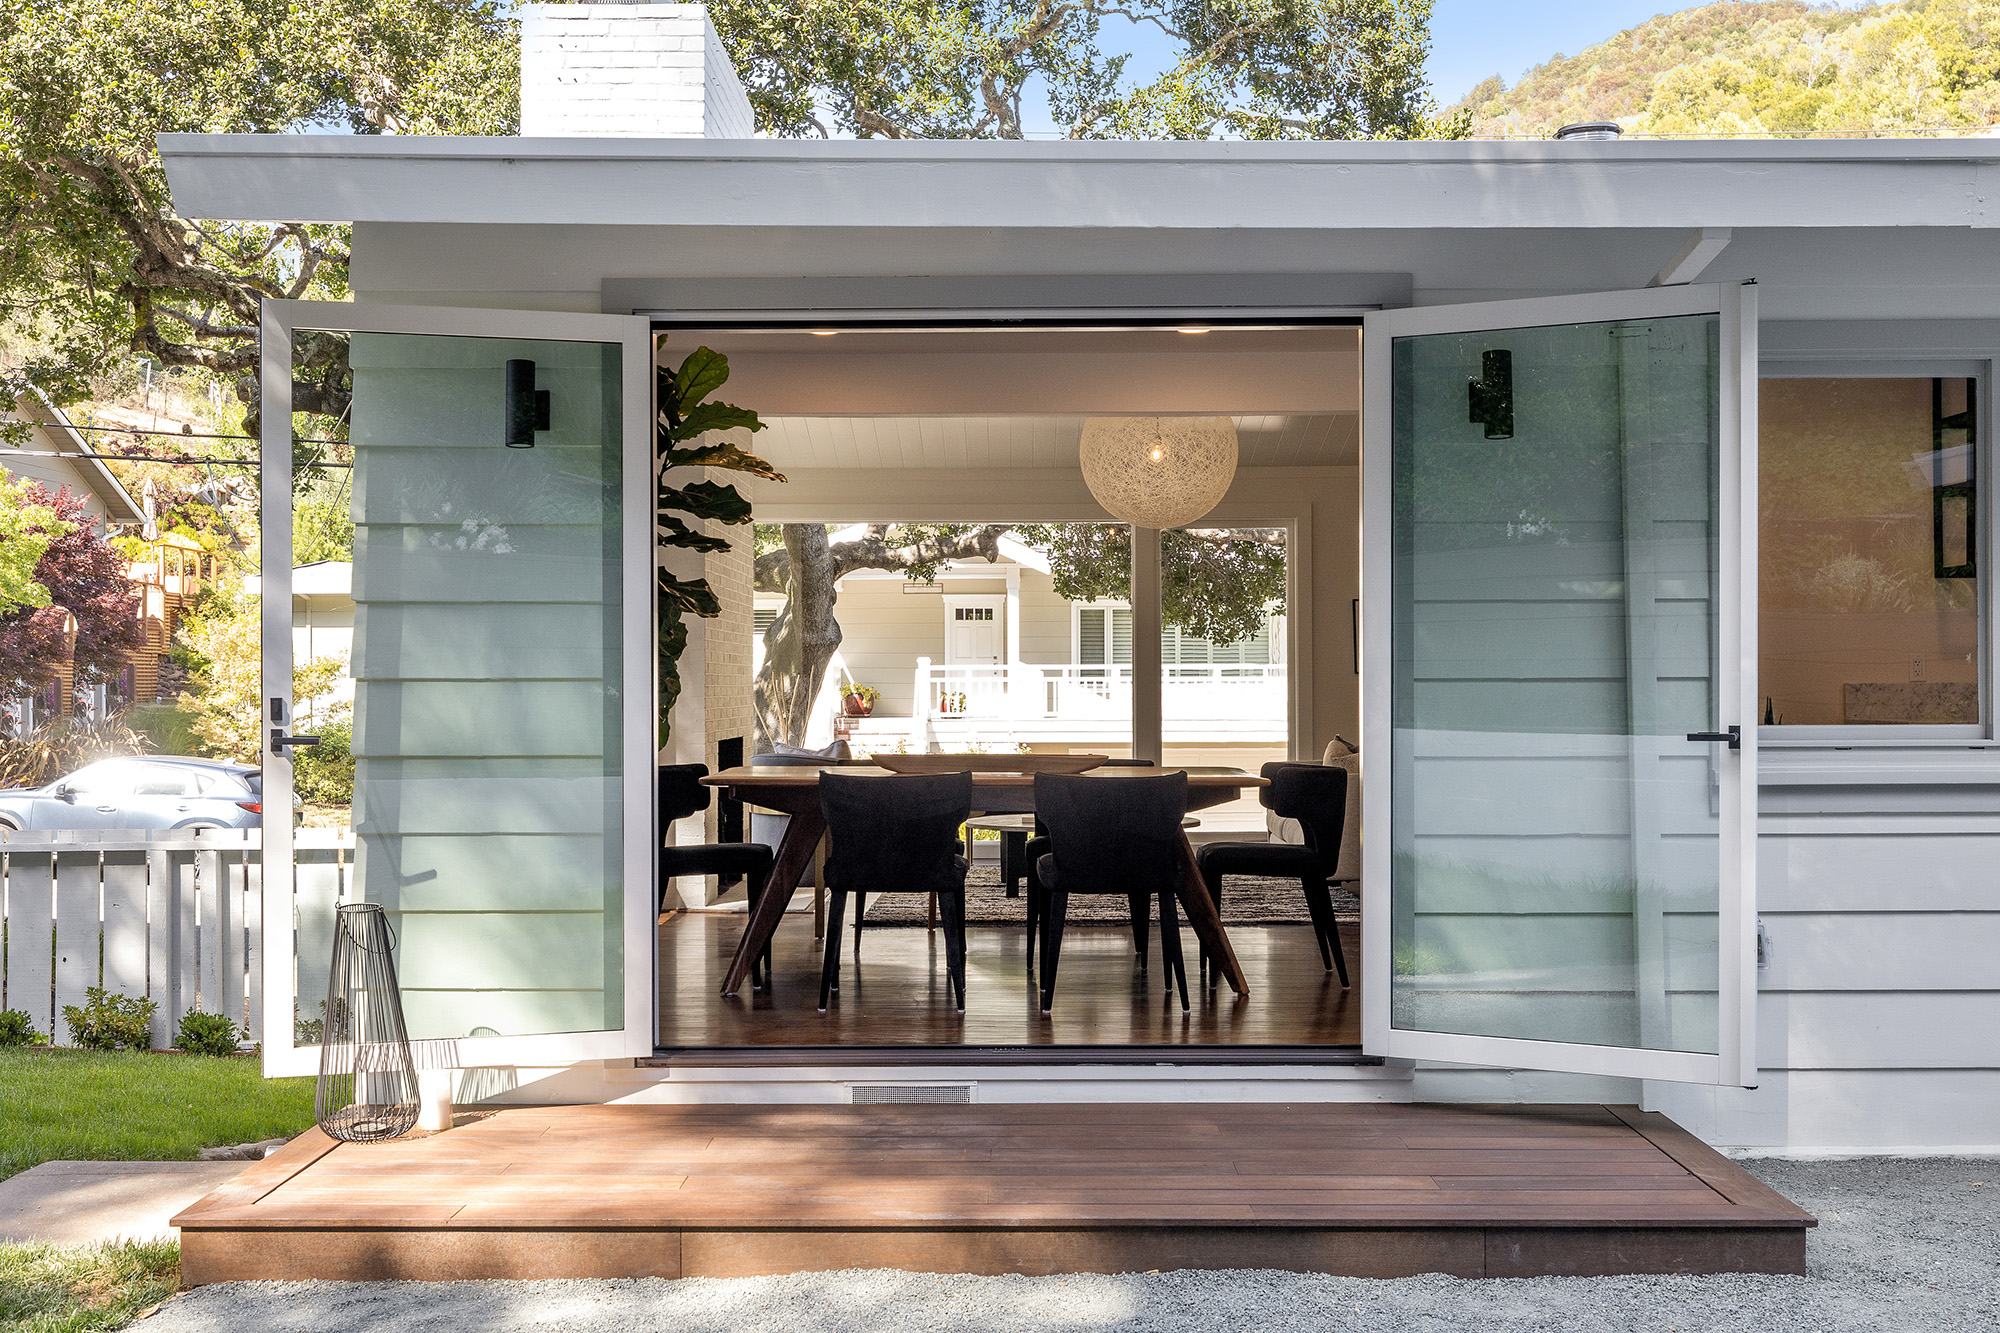 Exterior view of a home with a dining room and outdoor living experience 